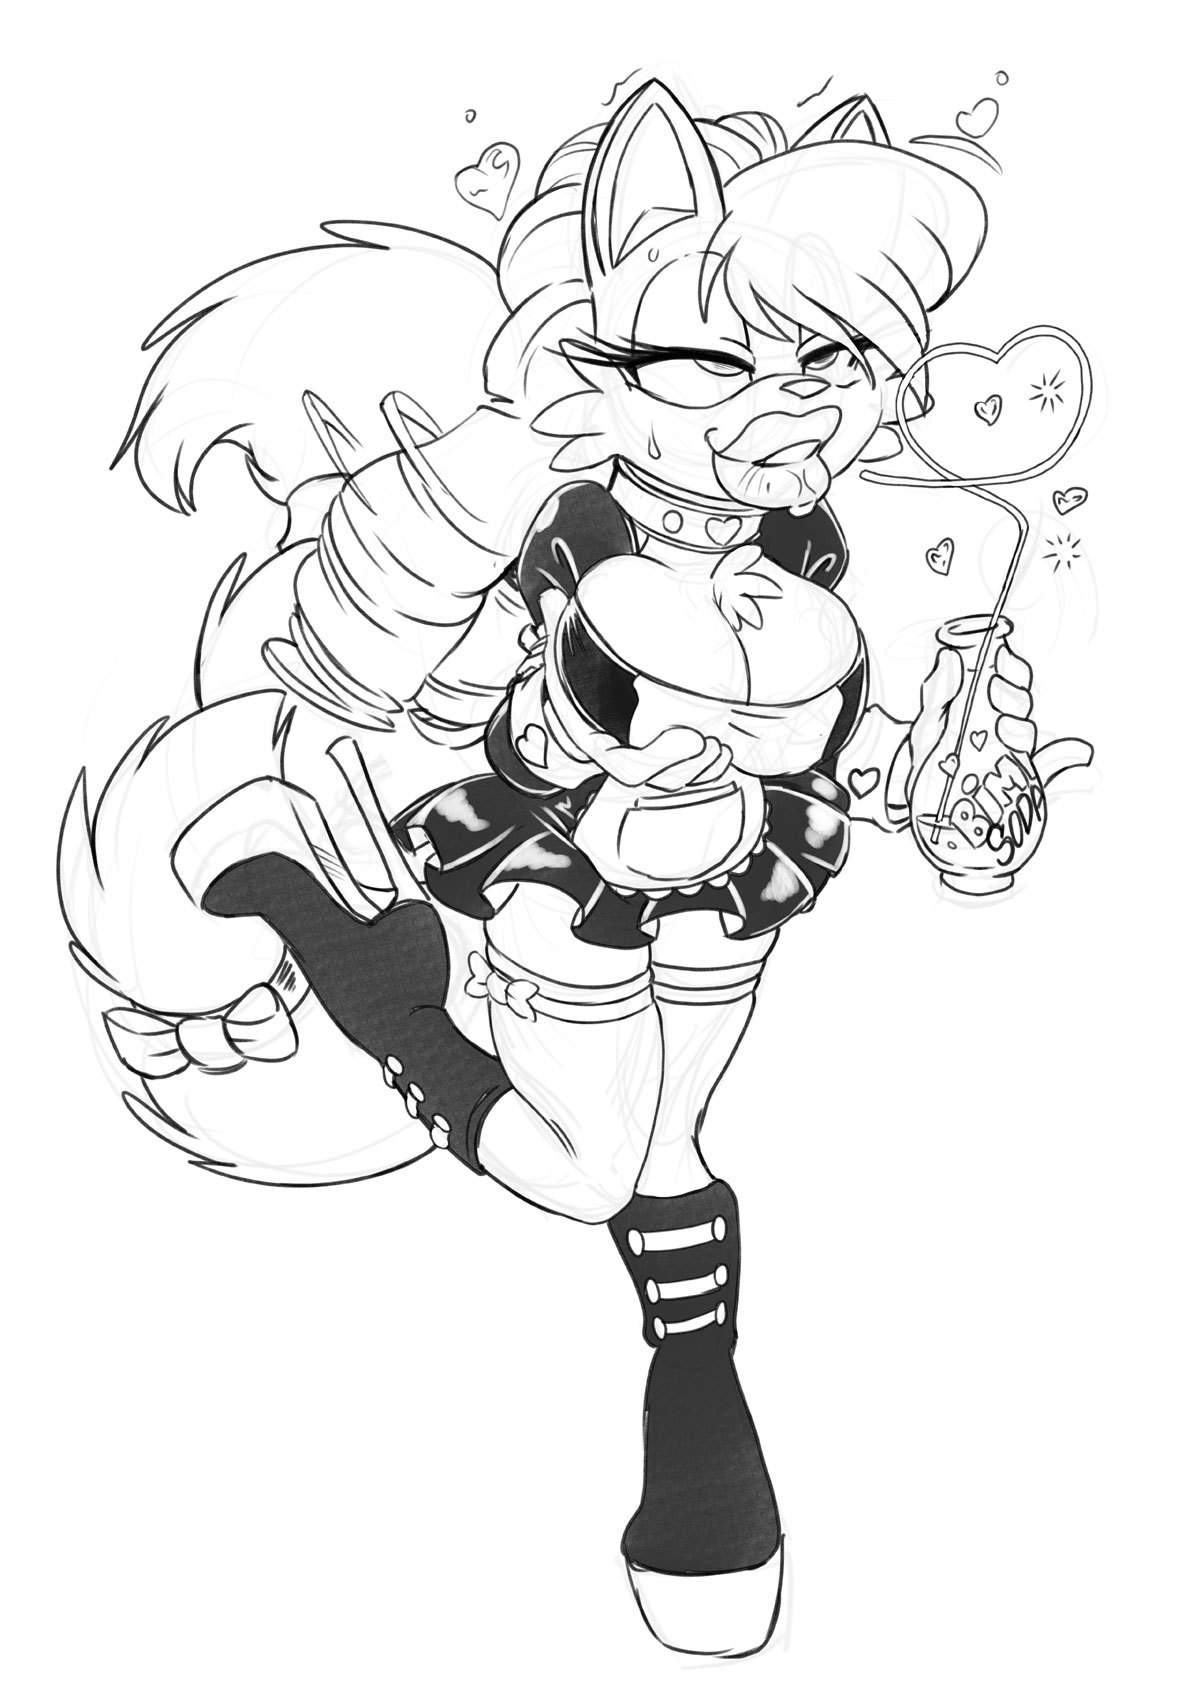 kandlin:  Bimbo SodaSketch Stream Commission for KlowPrower of his Khlo trying out